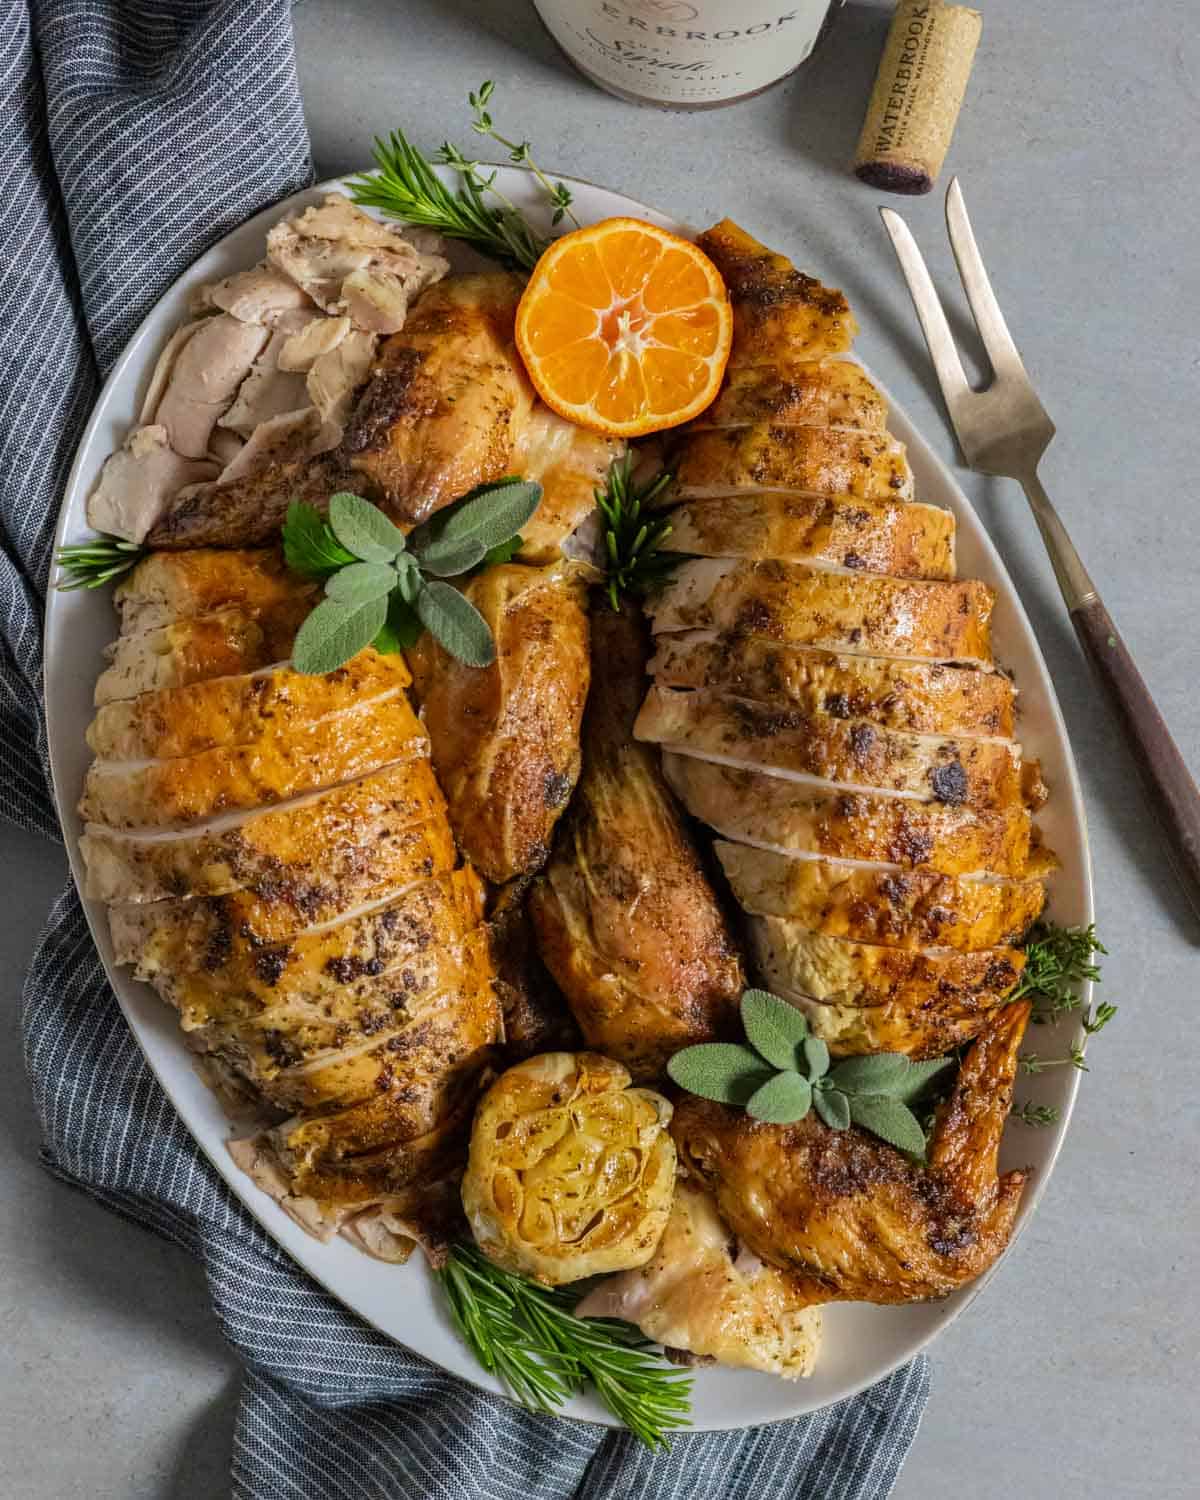 Sliced roasted chicken on a platter ready to serve.